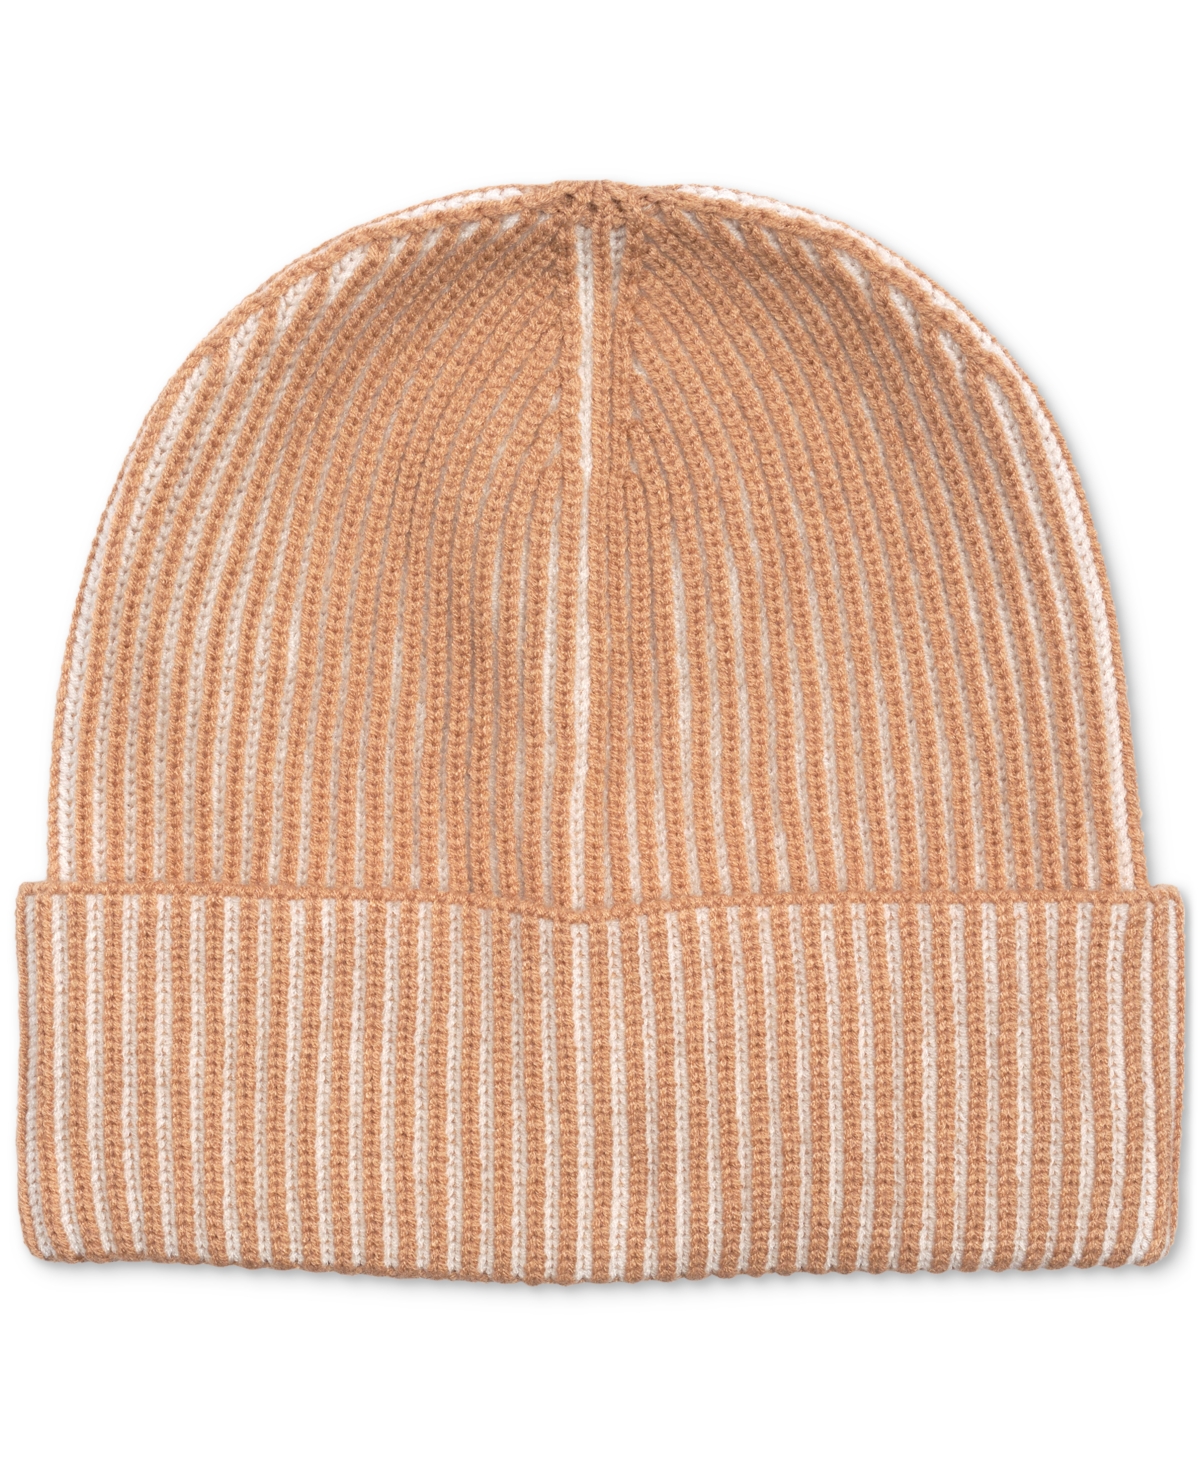 Men's Two-Tone Plated Beanie, Created for Macy's - Beige